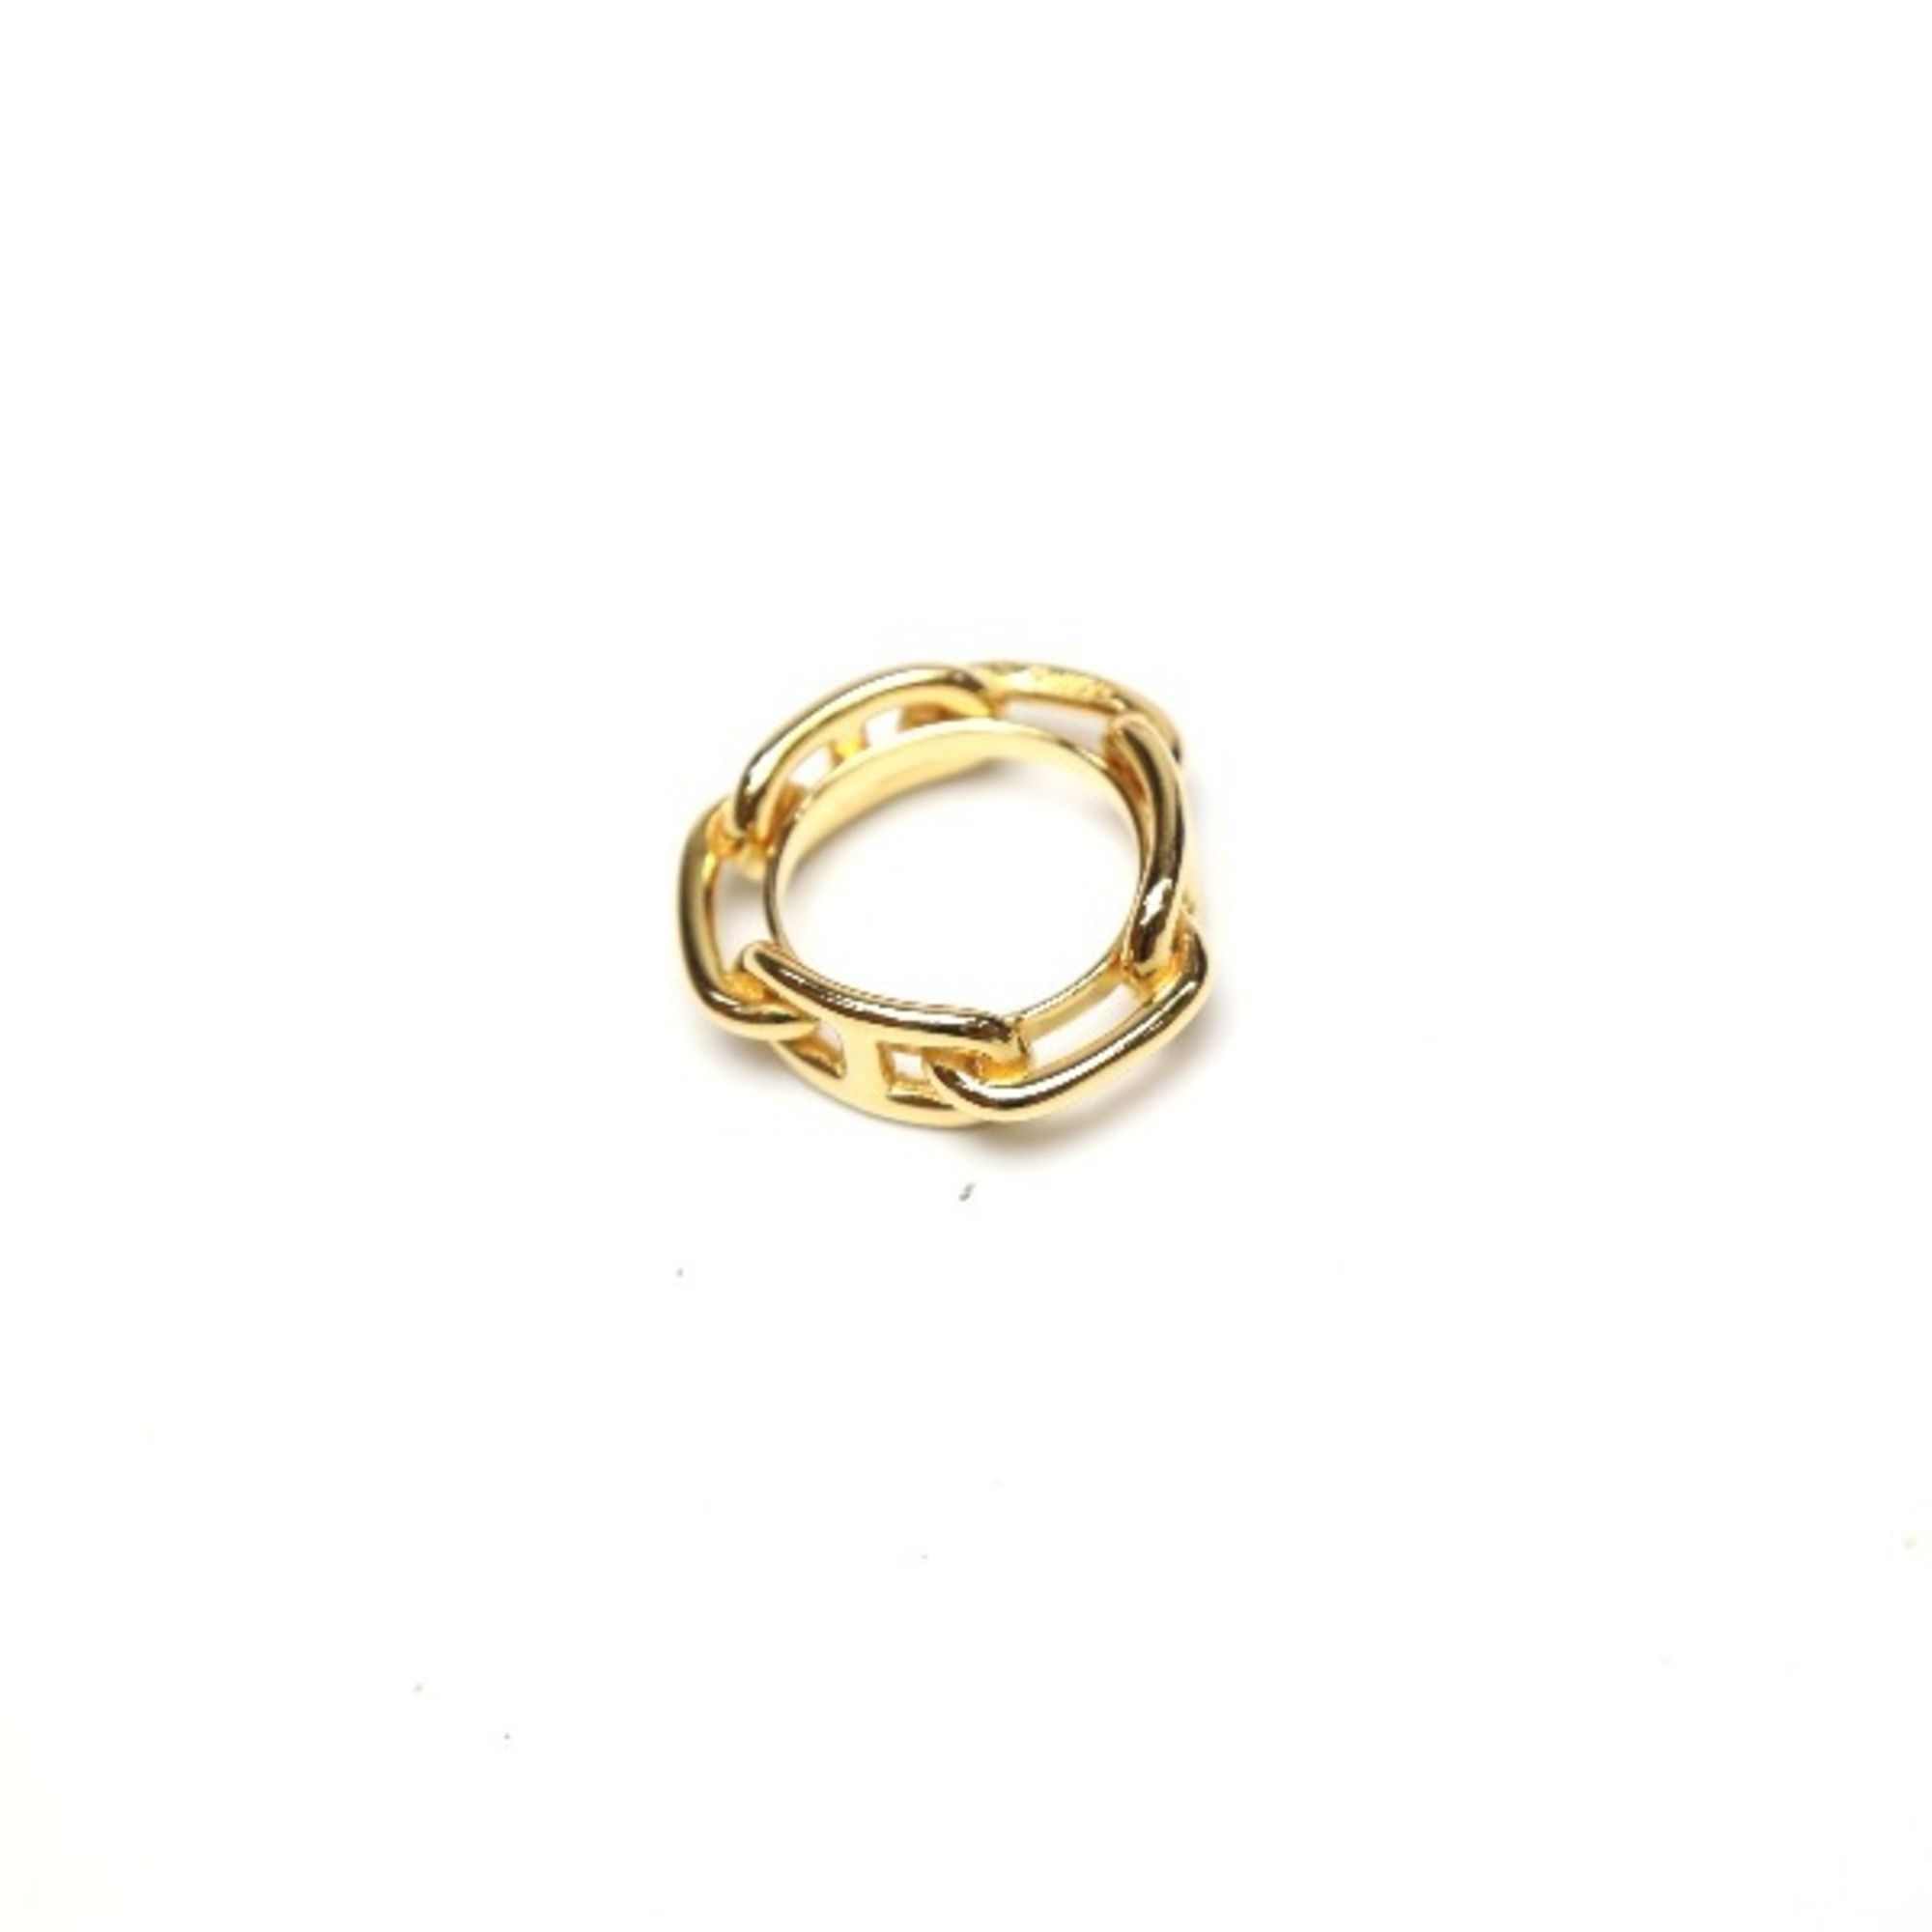 image of Hermes Chaine D'ancre Scarf Accessories Ring Hermes Gold, Women's